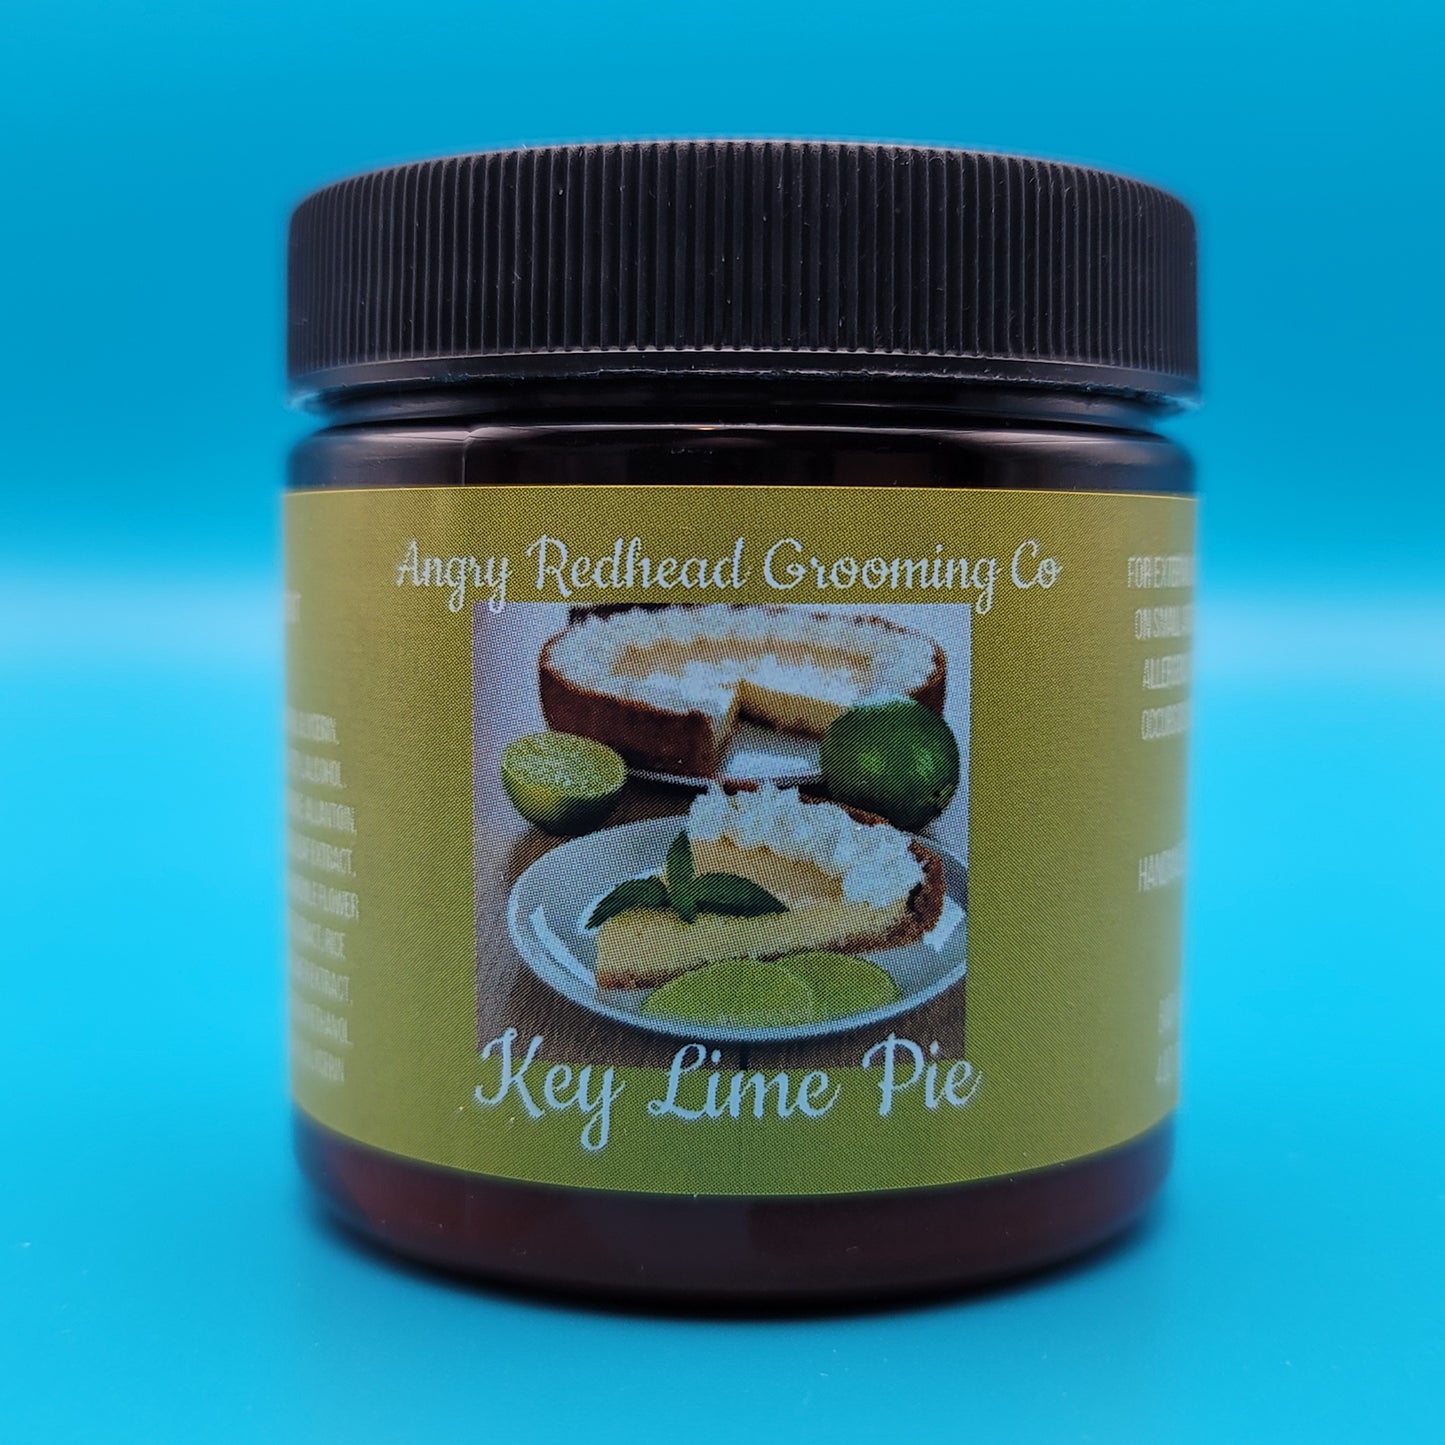 Key Lime Pie Body Butter by Angry Redhead Grooming Co - angryredheadgrooming.com